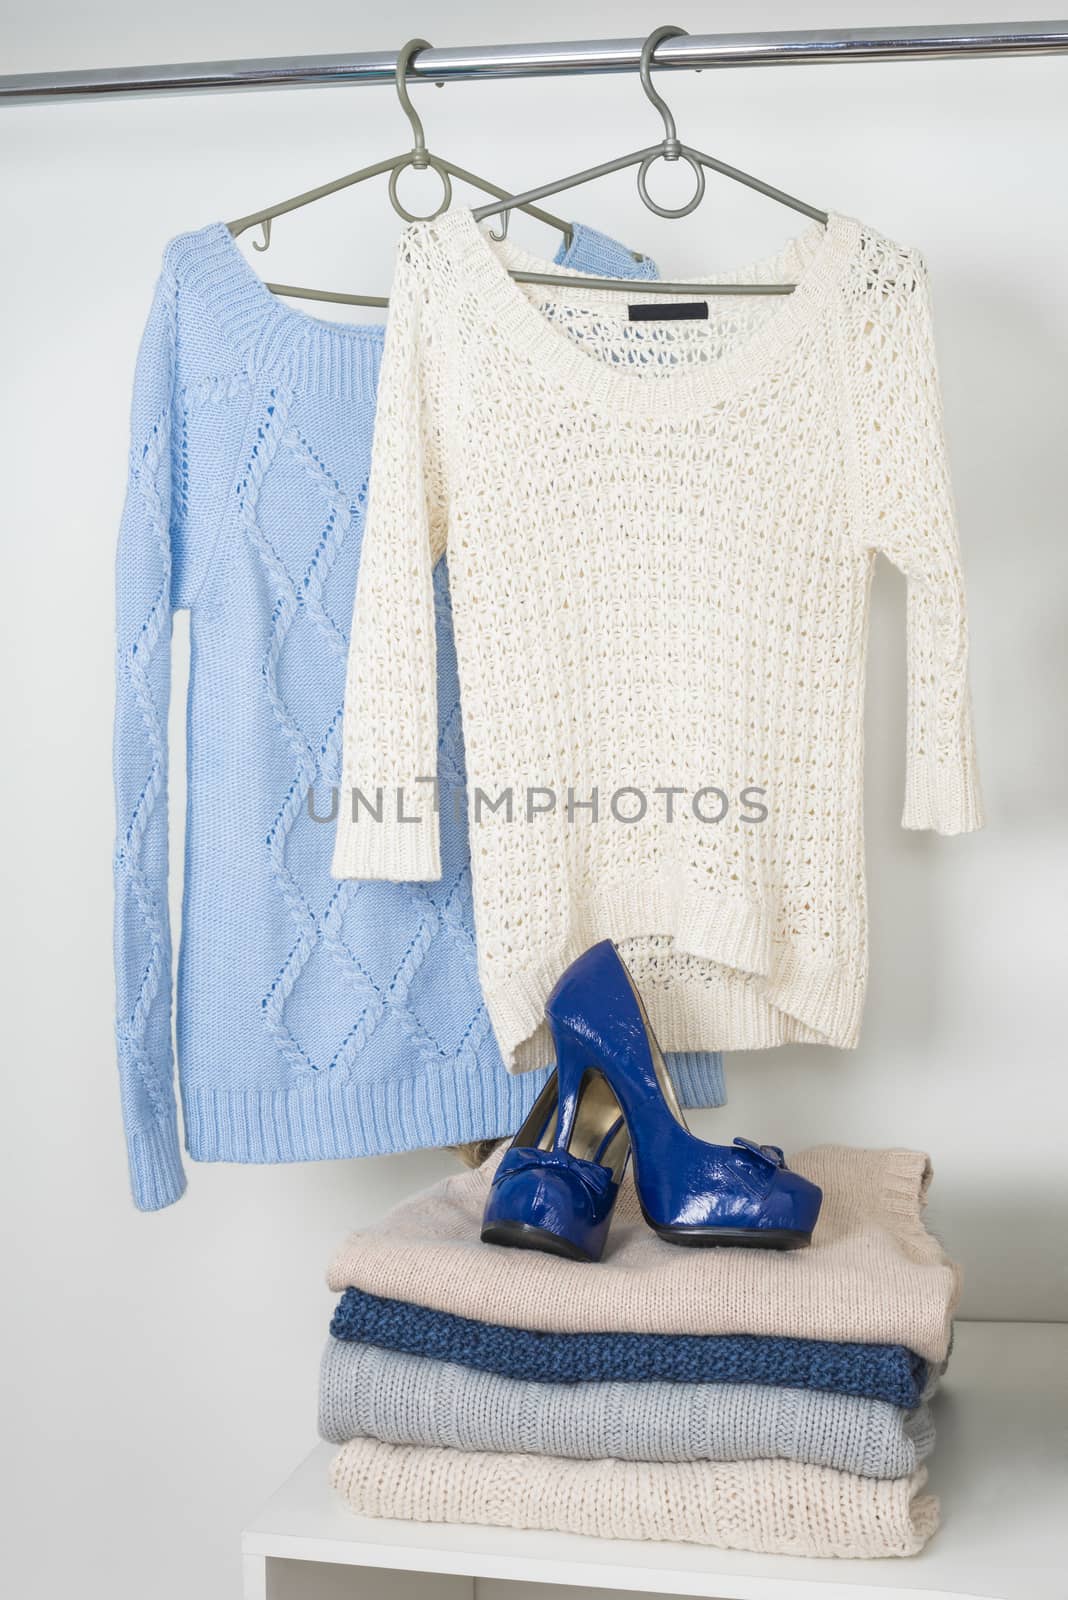 Women's warm knitted things in the white cupboard, two sweaters hanging on hangers, a pile of warm woolen clothes and lacquered blue shoes